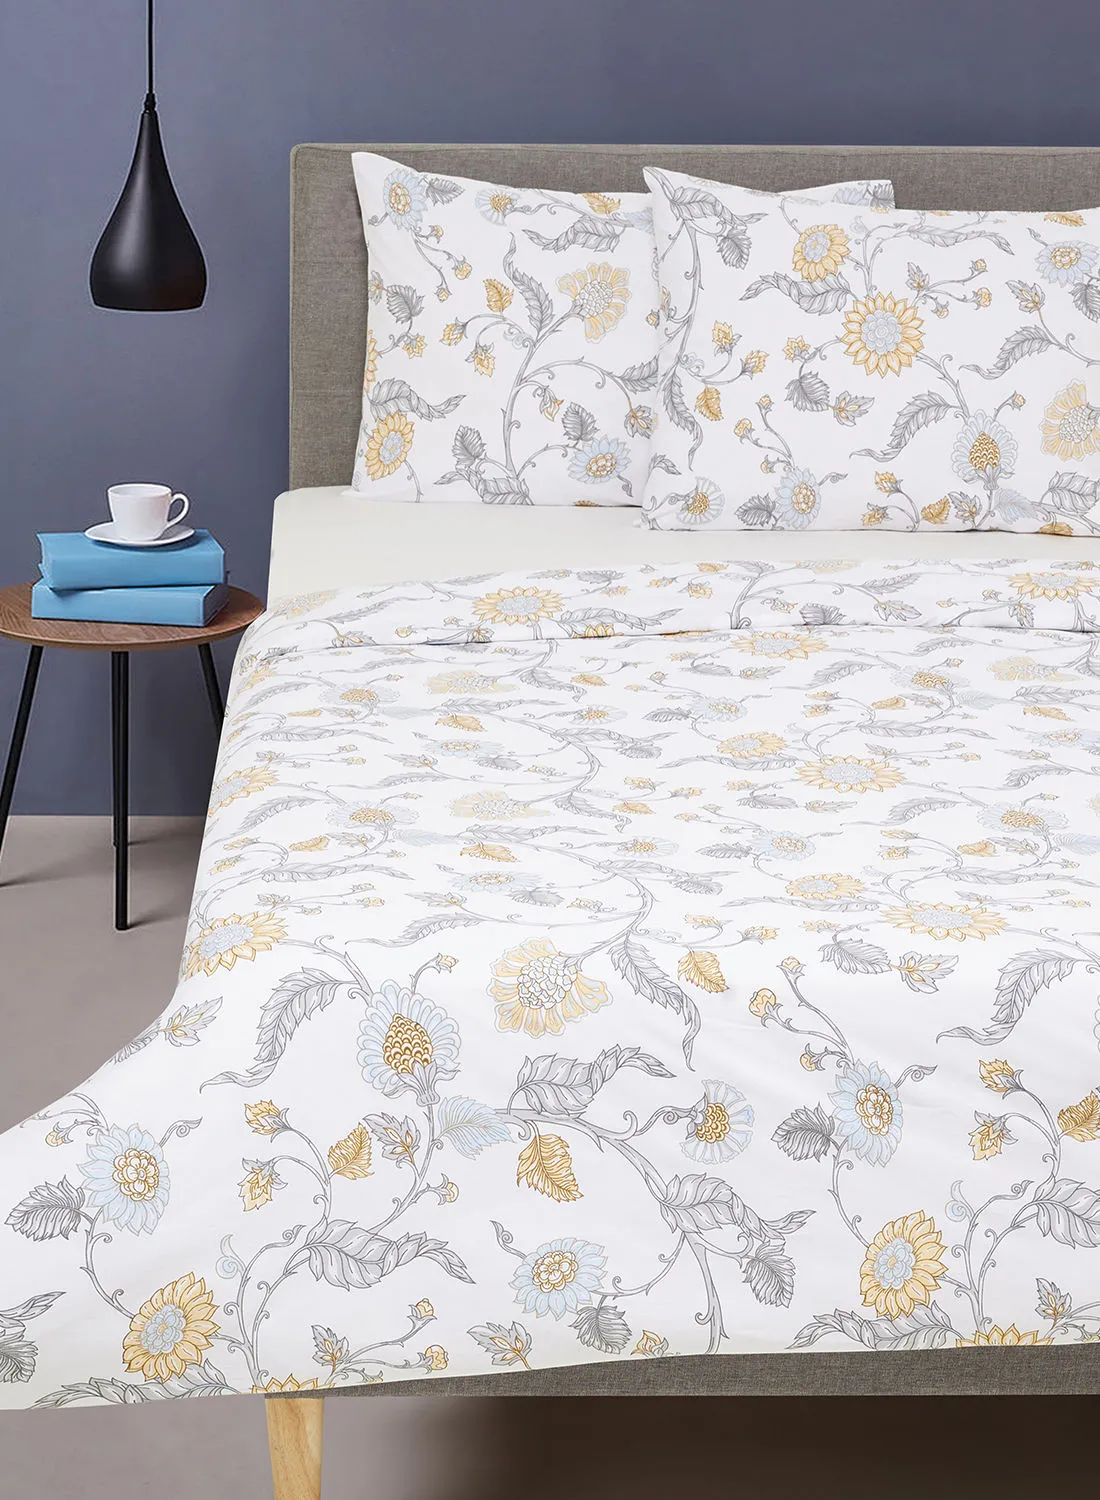 noon east Duvet Cover With Pillow Cover 50X75 Cm, Comforter 200X200 Cm, - For Queen Size Mattress - White/Yellow/Grey 100% Cotton Percale - 180 Thread Count